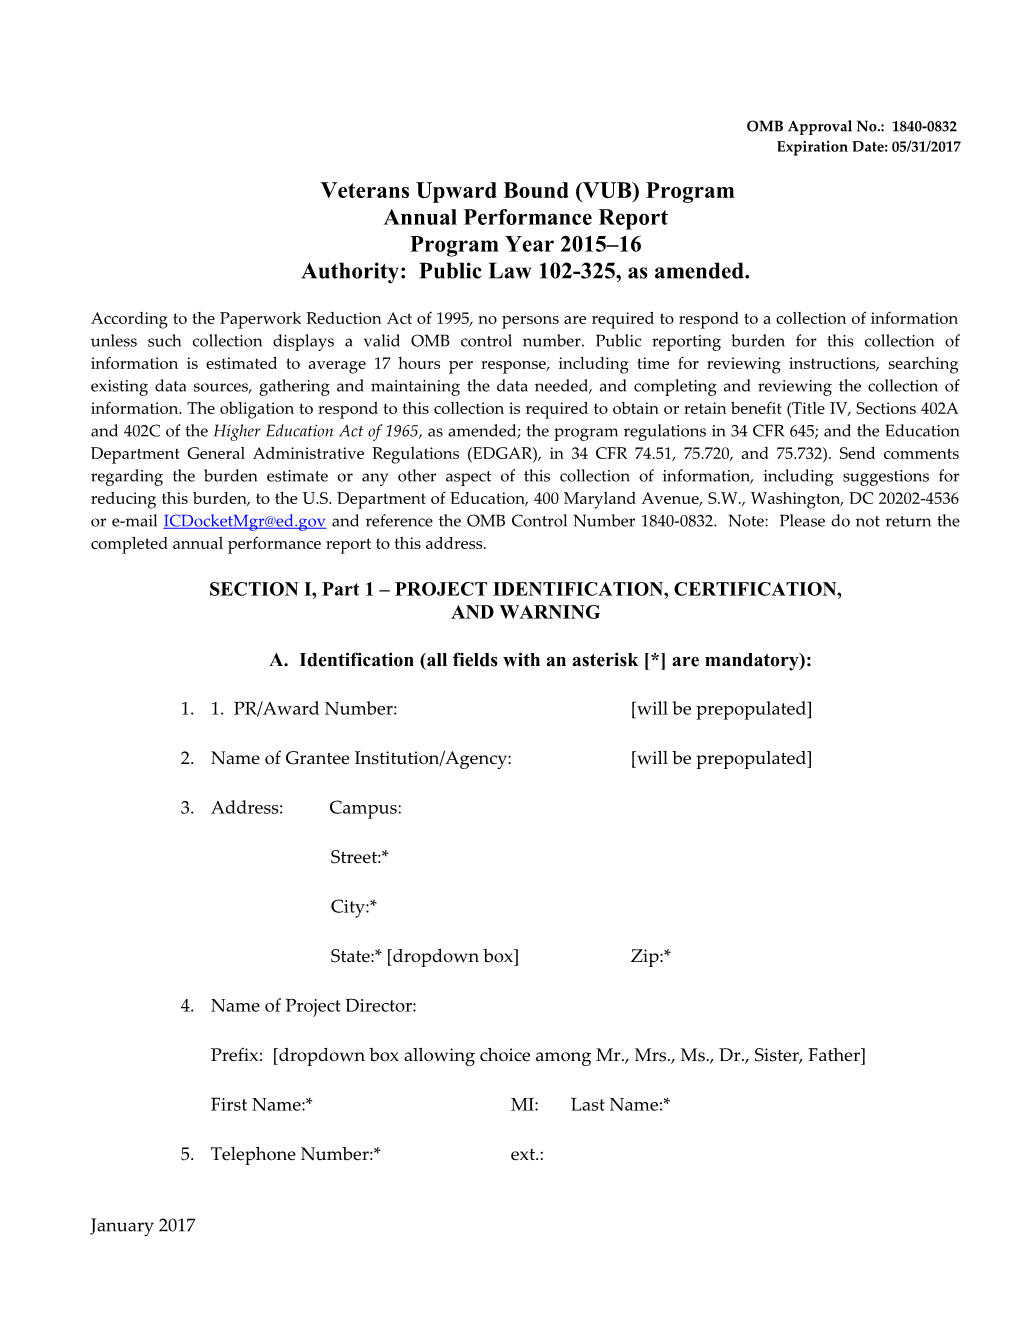 2015-2016 Annual Performance Report Sections I and II for the Veterans Upward Bound Program